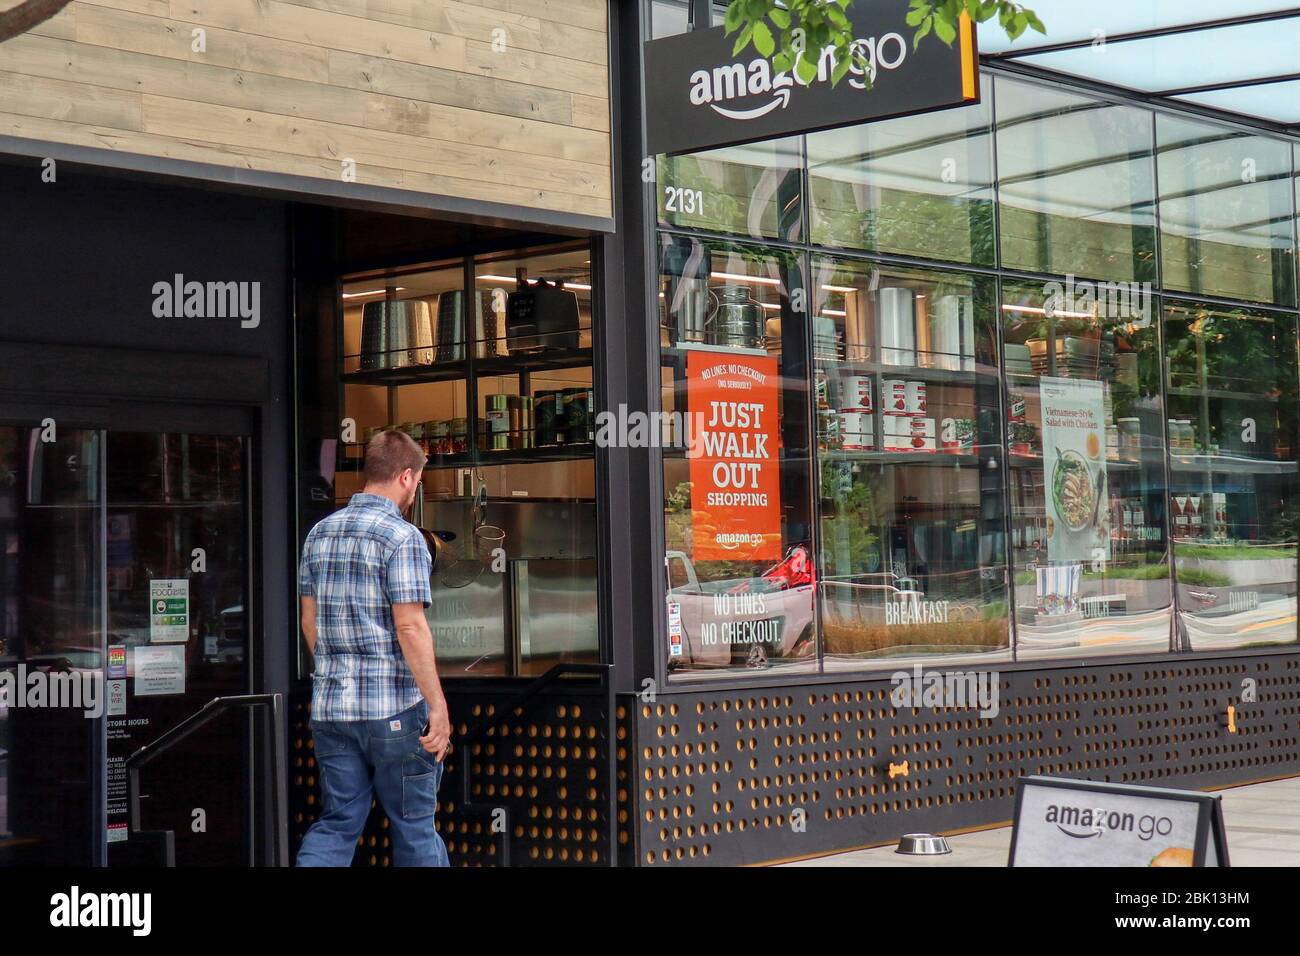 Amazon Go Store High Resolution Stock Photography and Images - Alamy